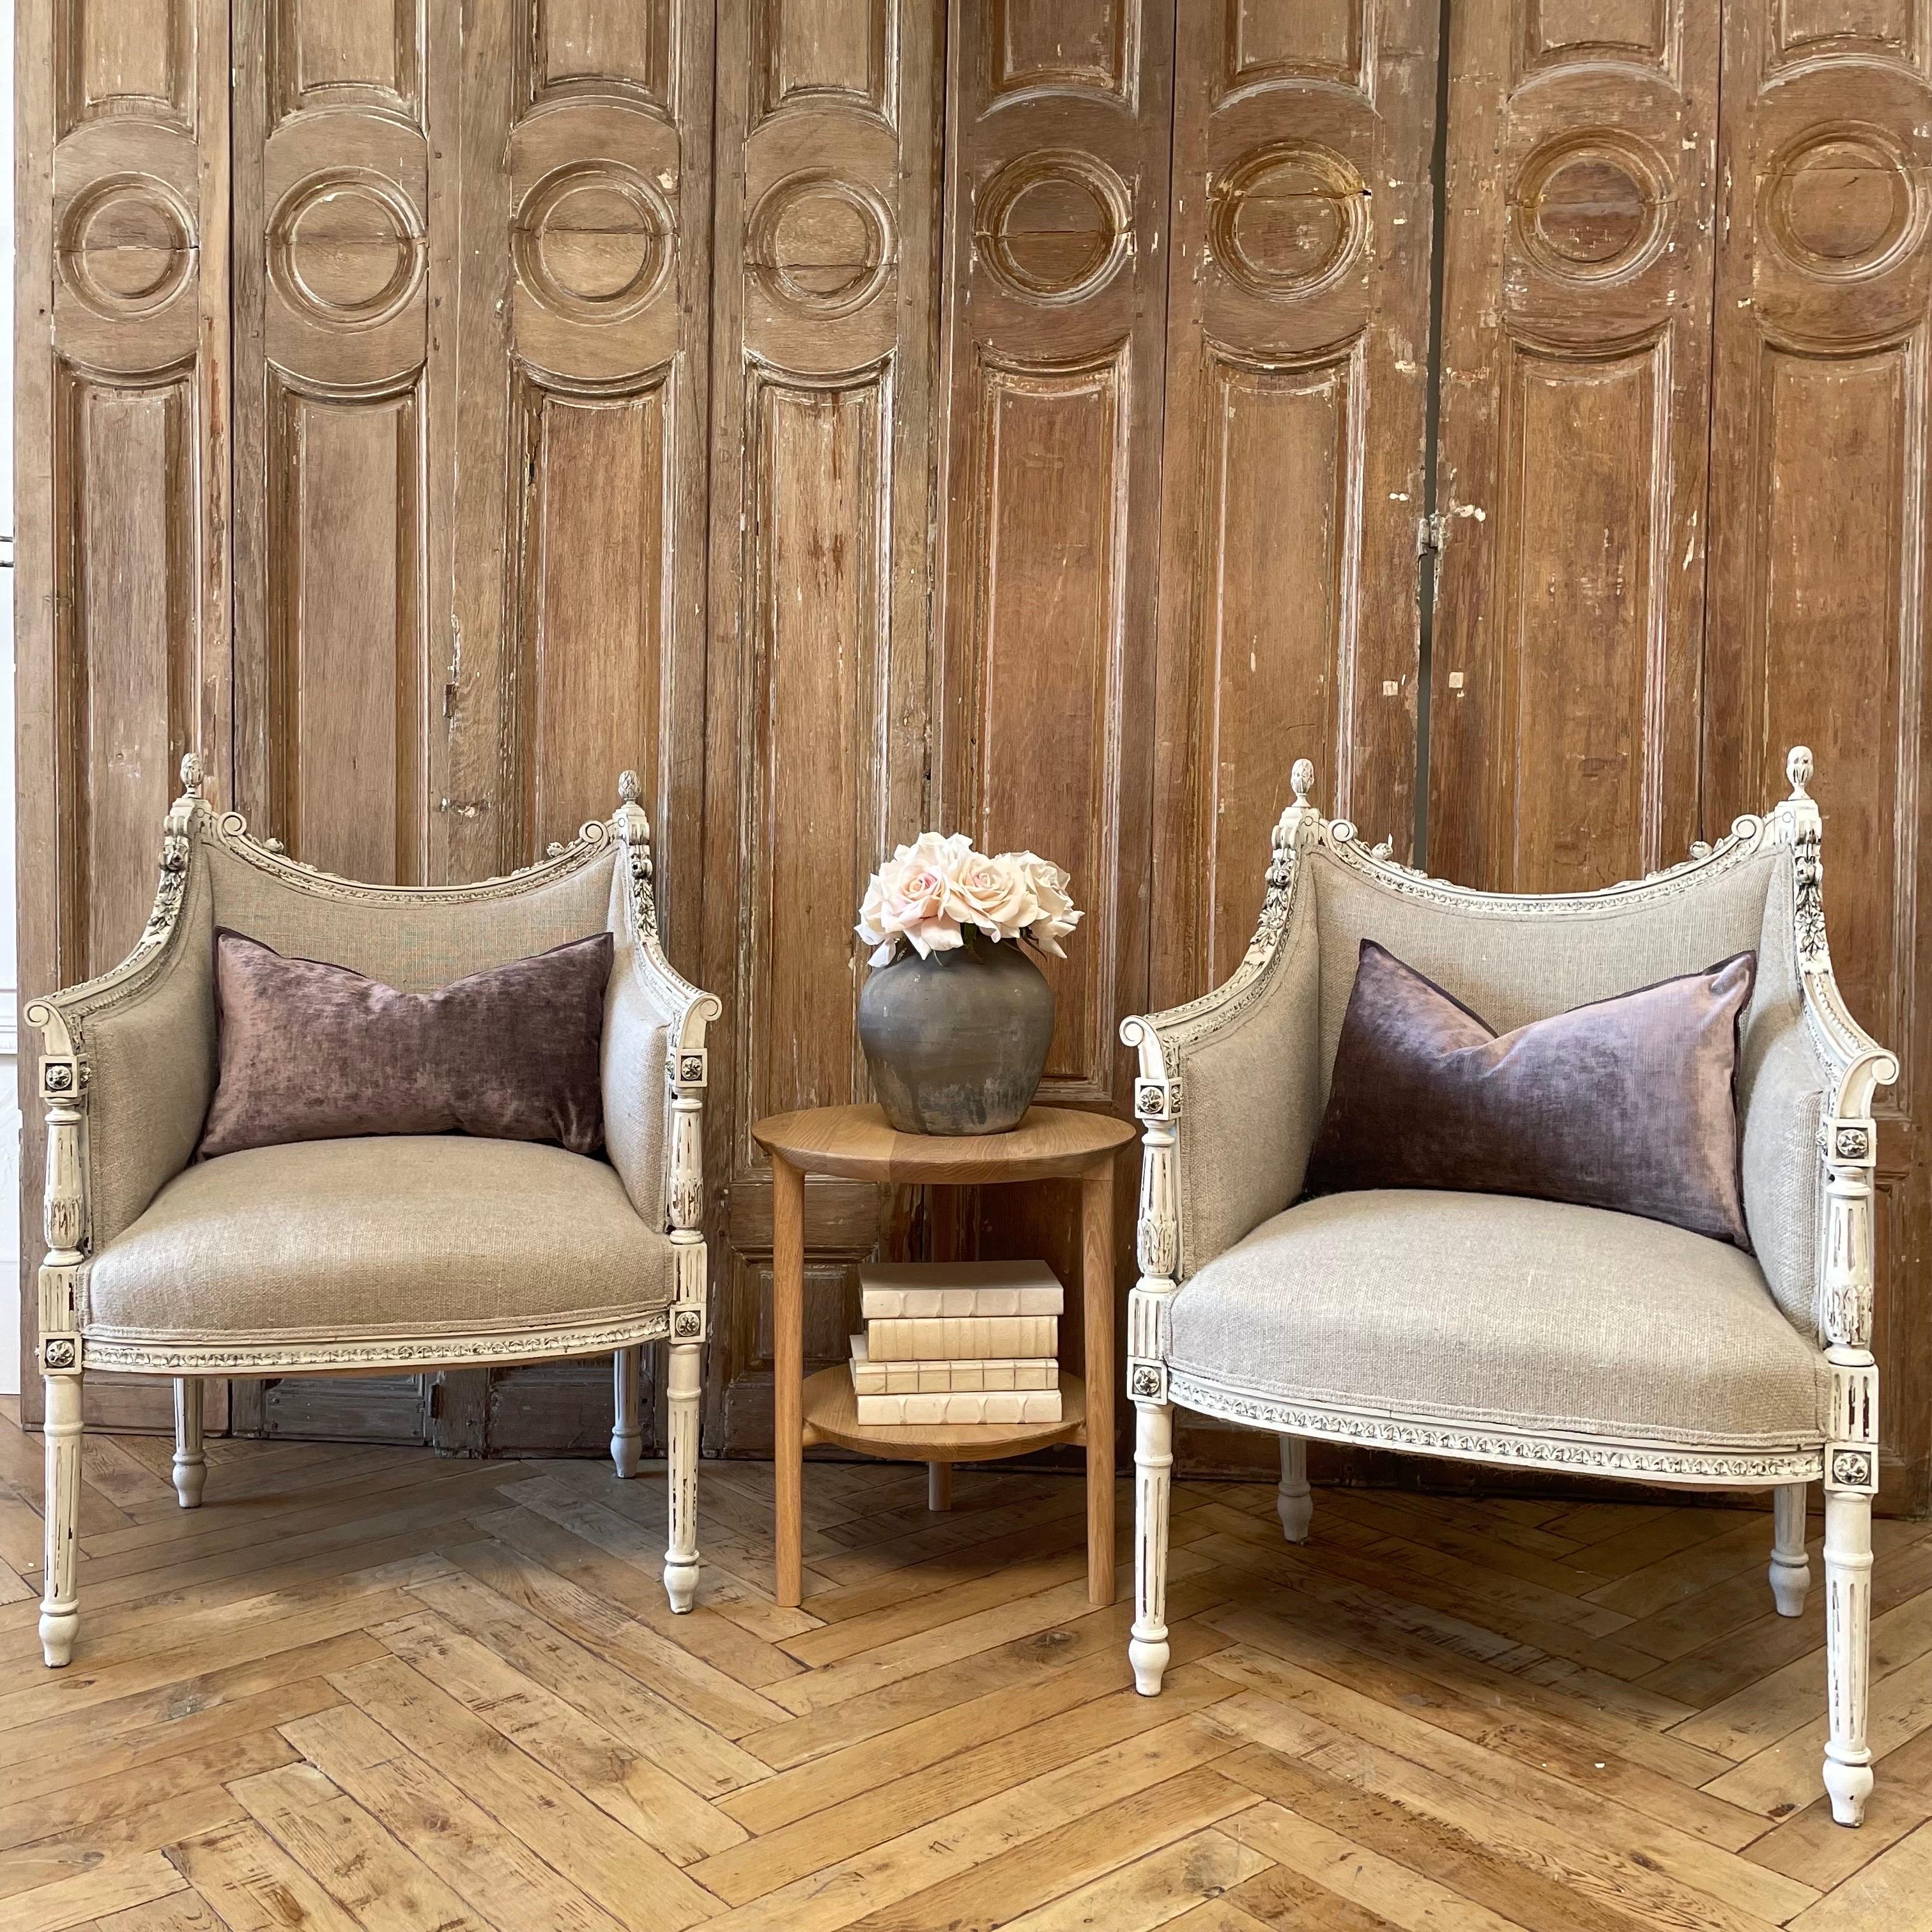 Beautiful carved and painted Louis XVI style chairs upholstered in 100% pure Irish linen in a natural flax color.
Paint is oyster white, with subtle distressed edges, and finished with an antique glazed patina.
Size: 26” w x 23”d x 36”h
SH 18” , SD